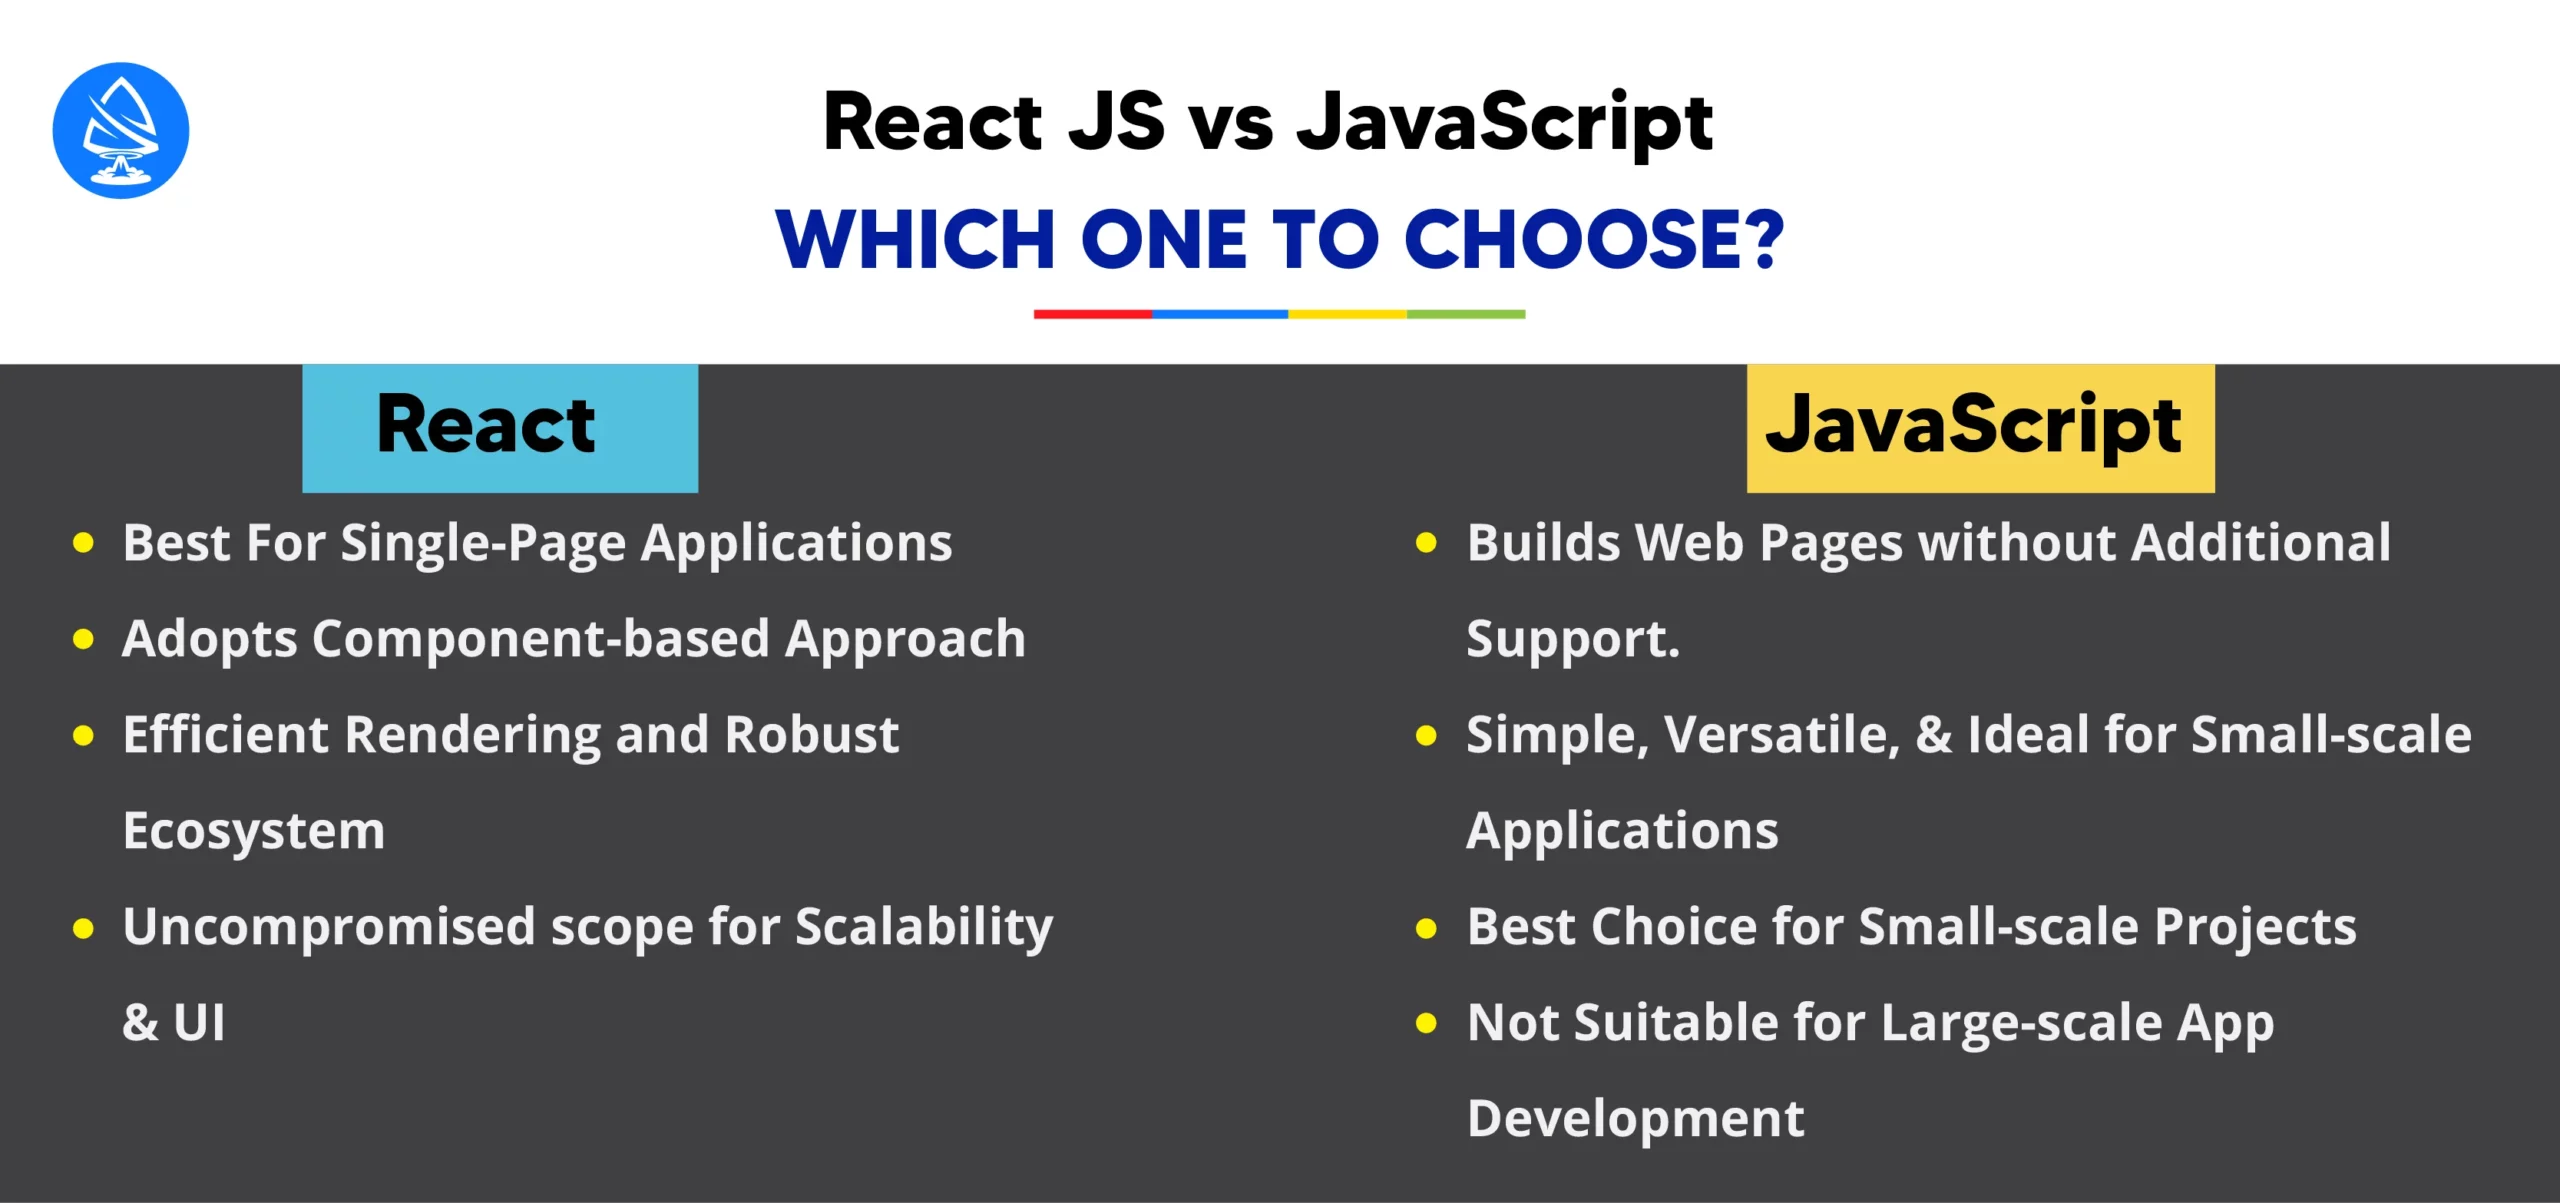 React JS Vs JavaScript: Which One To Choose? 